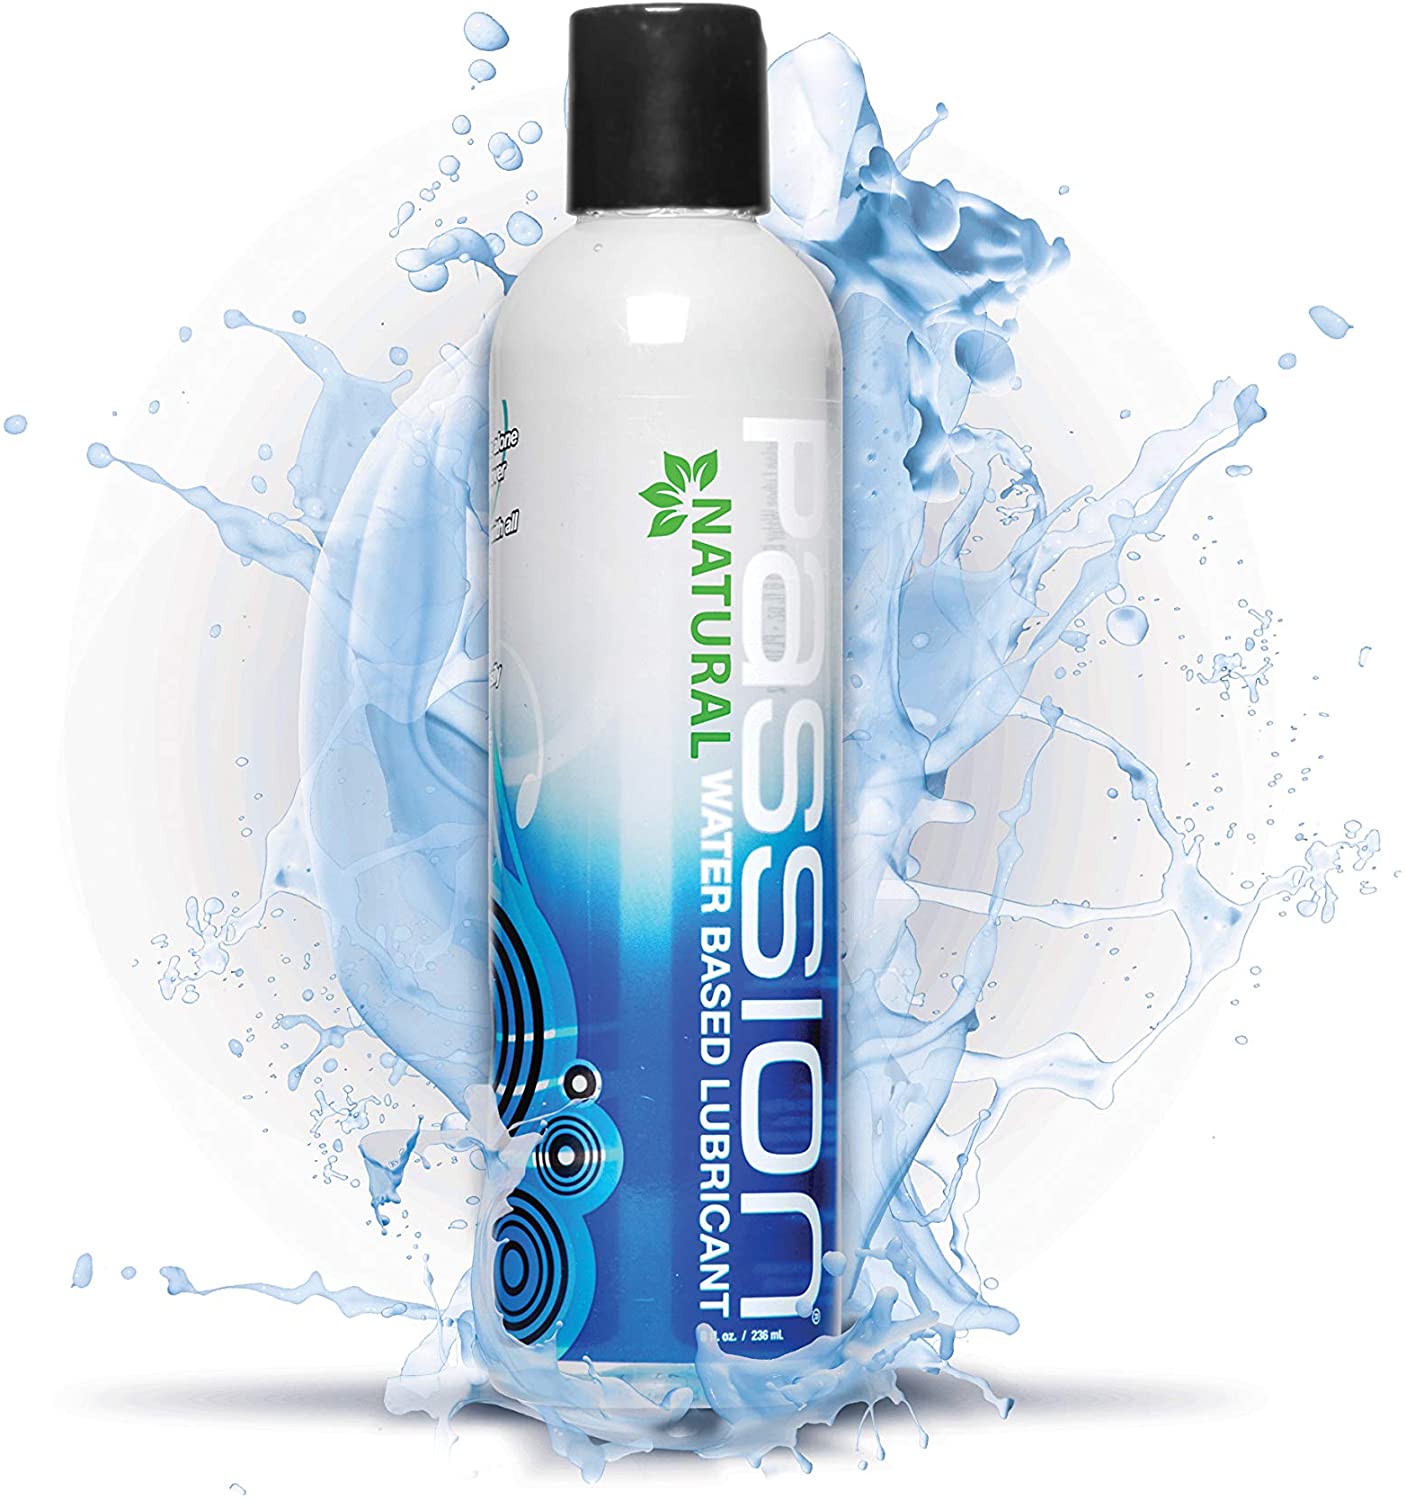 Passion Natural Water-based Lubricant - 8 Oz